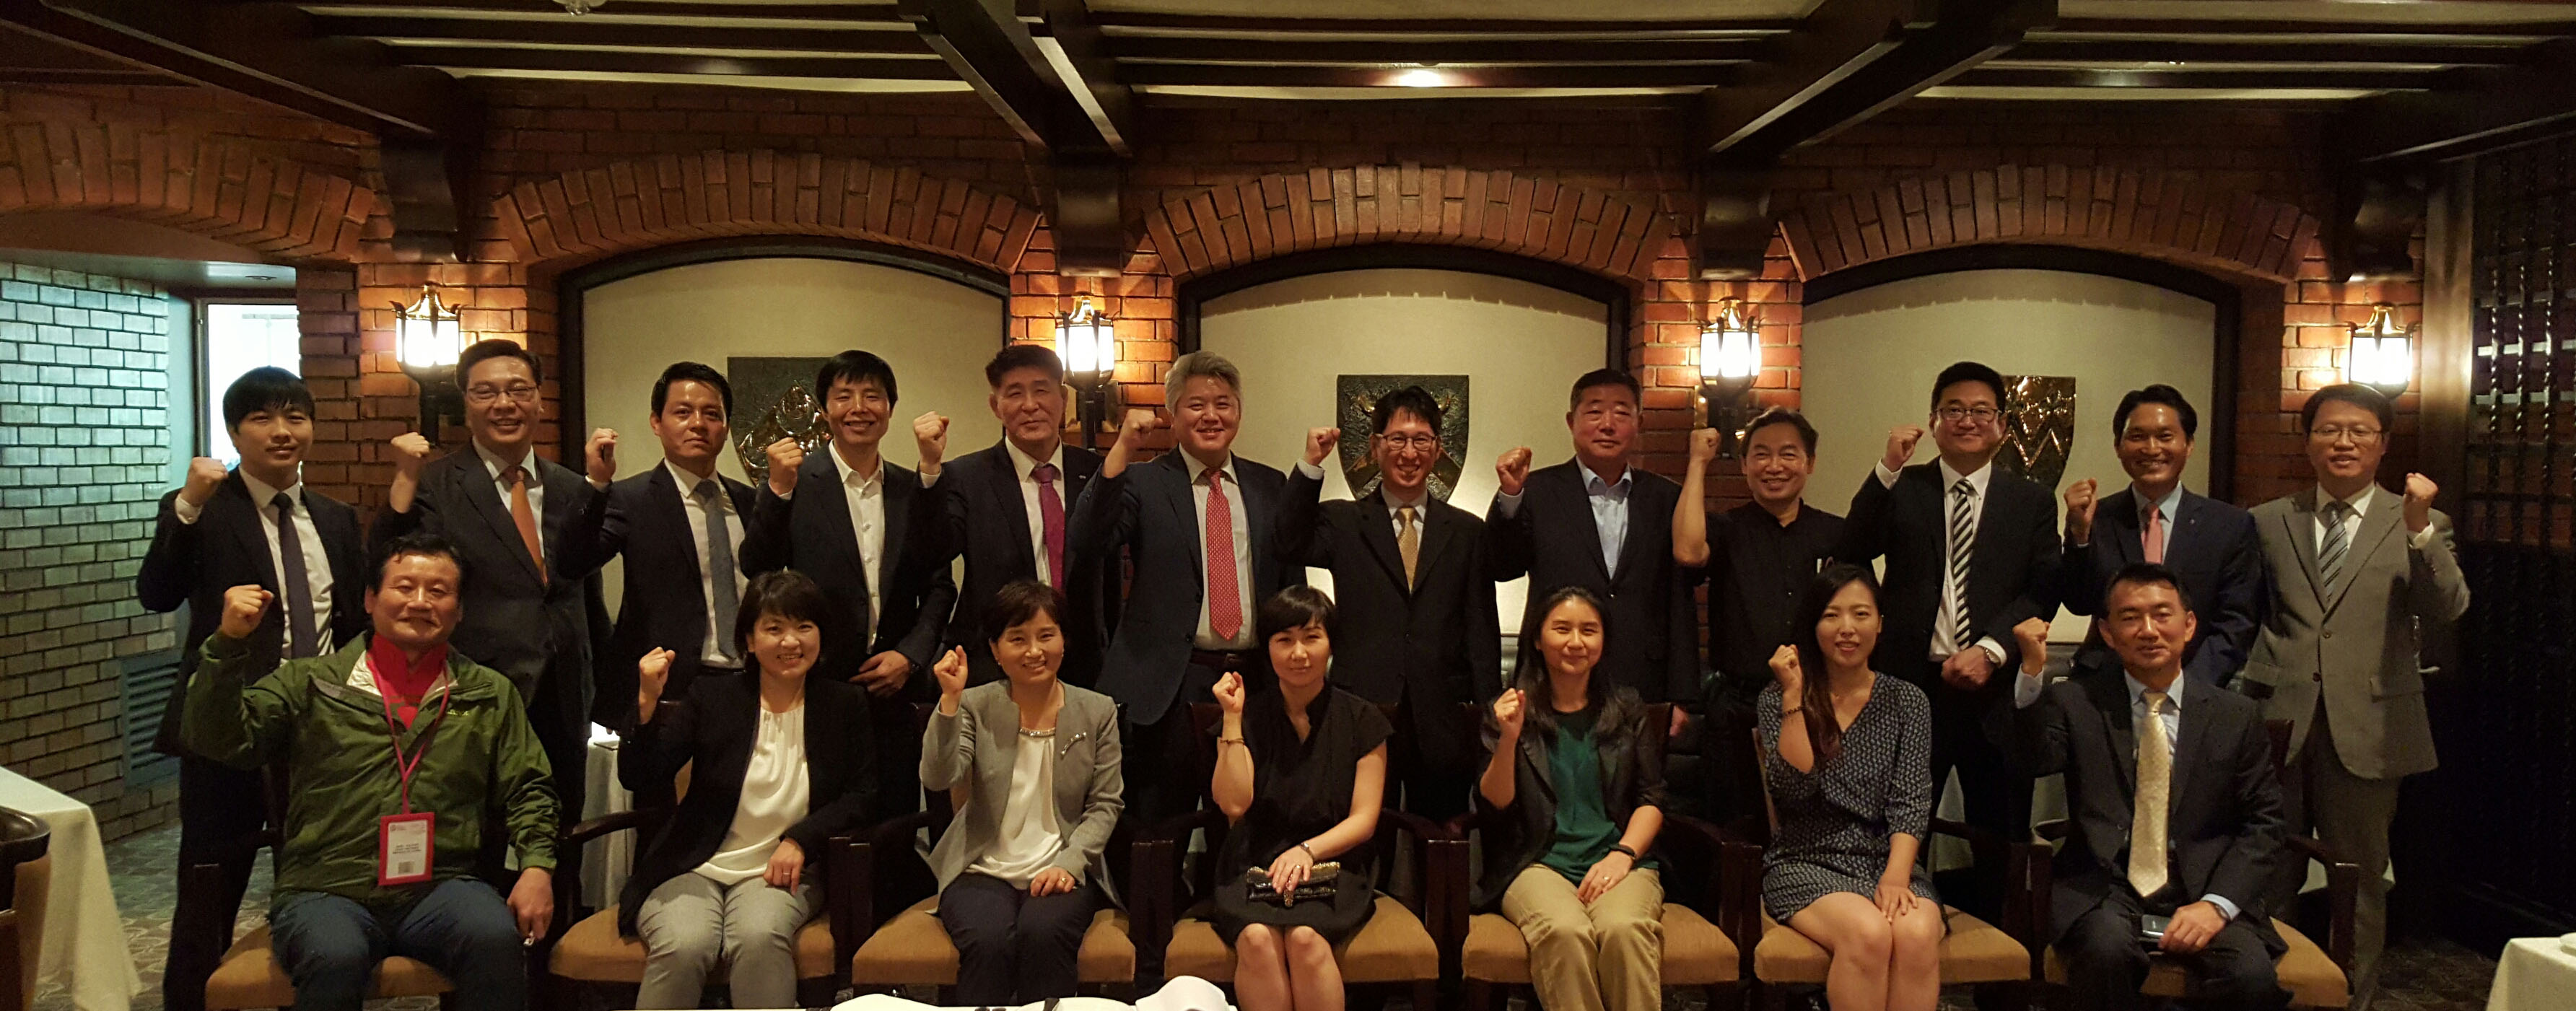 Korean businessmen, Mr. Wonchul Koh, director general of KOTRA in Colombo, and Mr. Sungsoo Jung, chief representative of the Korea Eximbank’s Colombo office